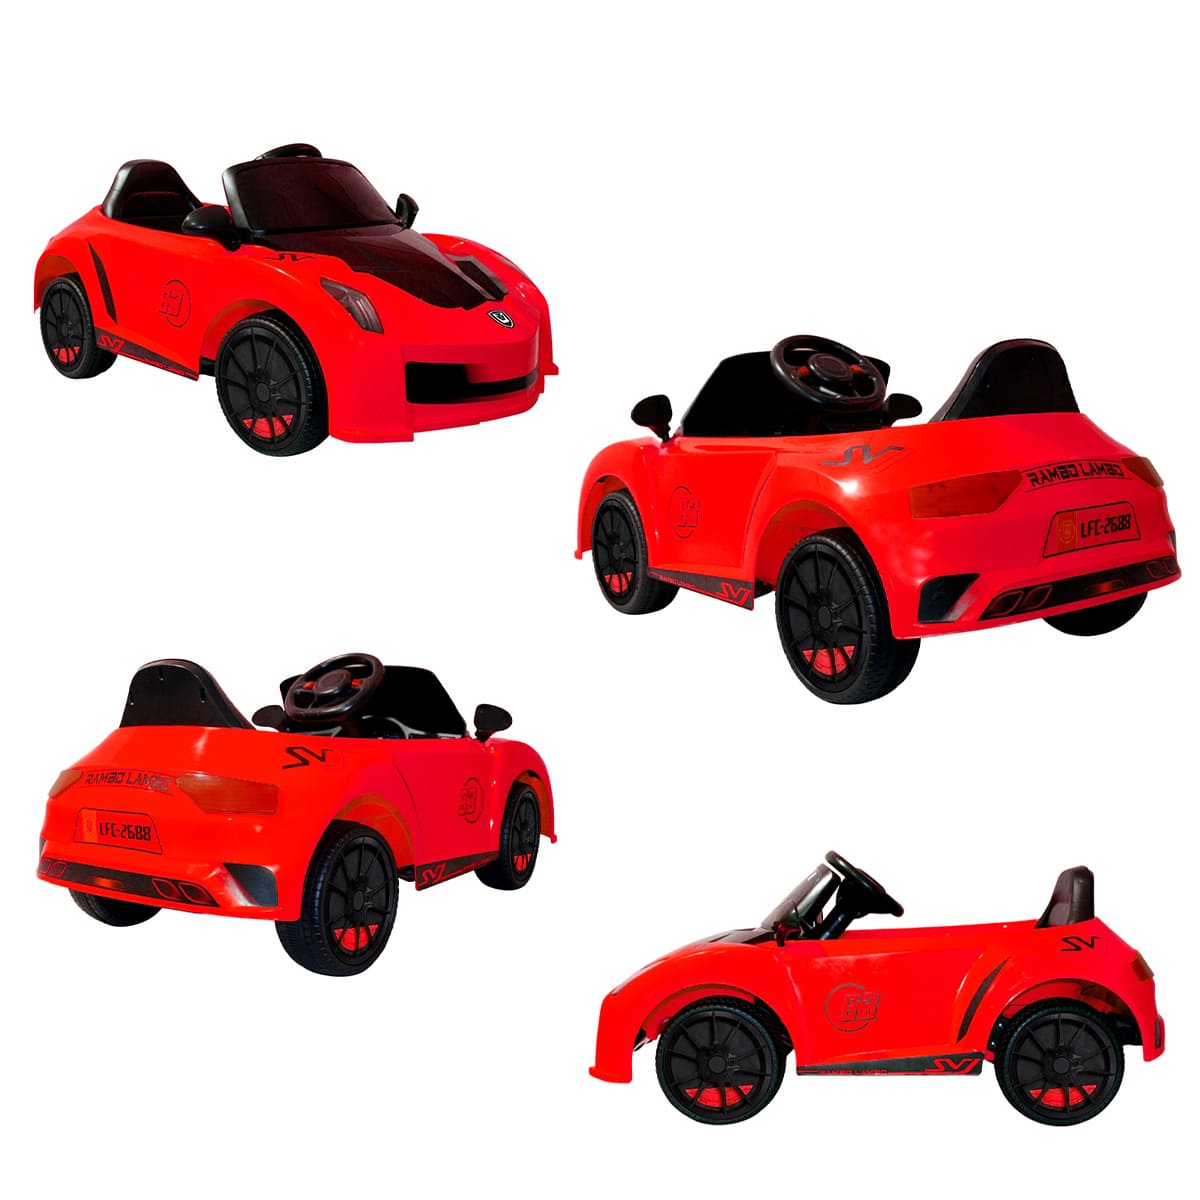 Remote-controlled ride-on cars